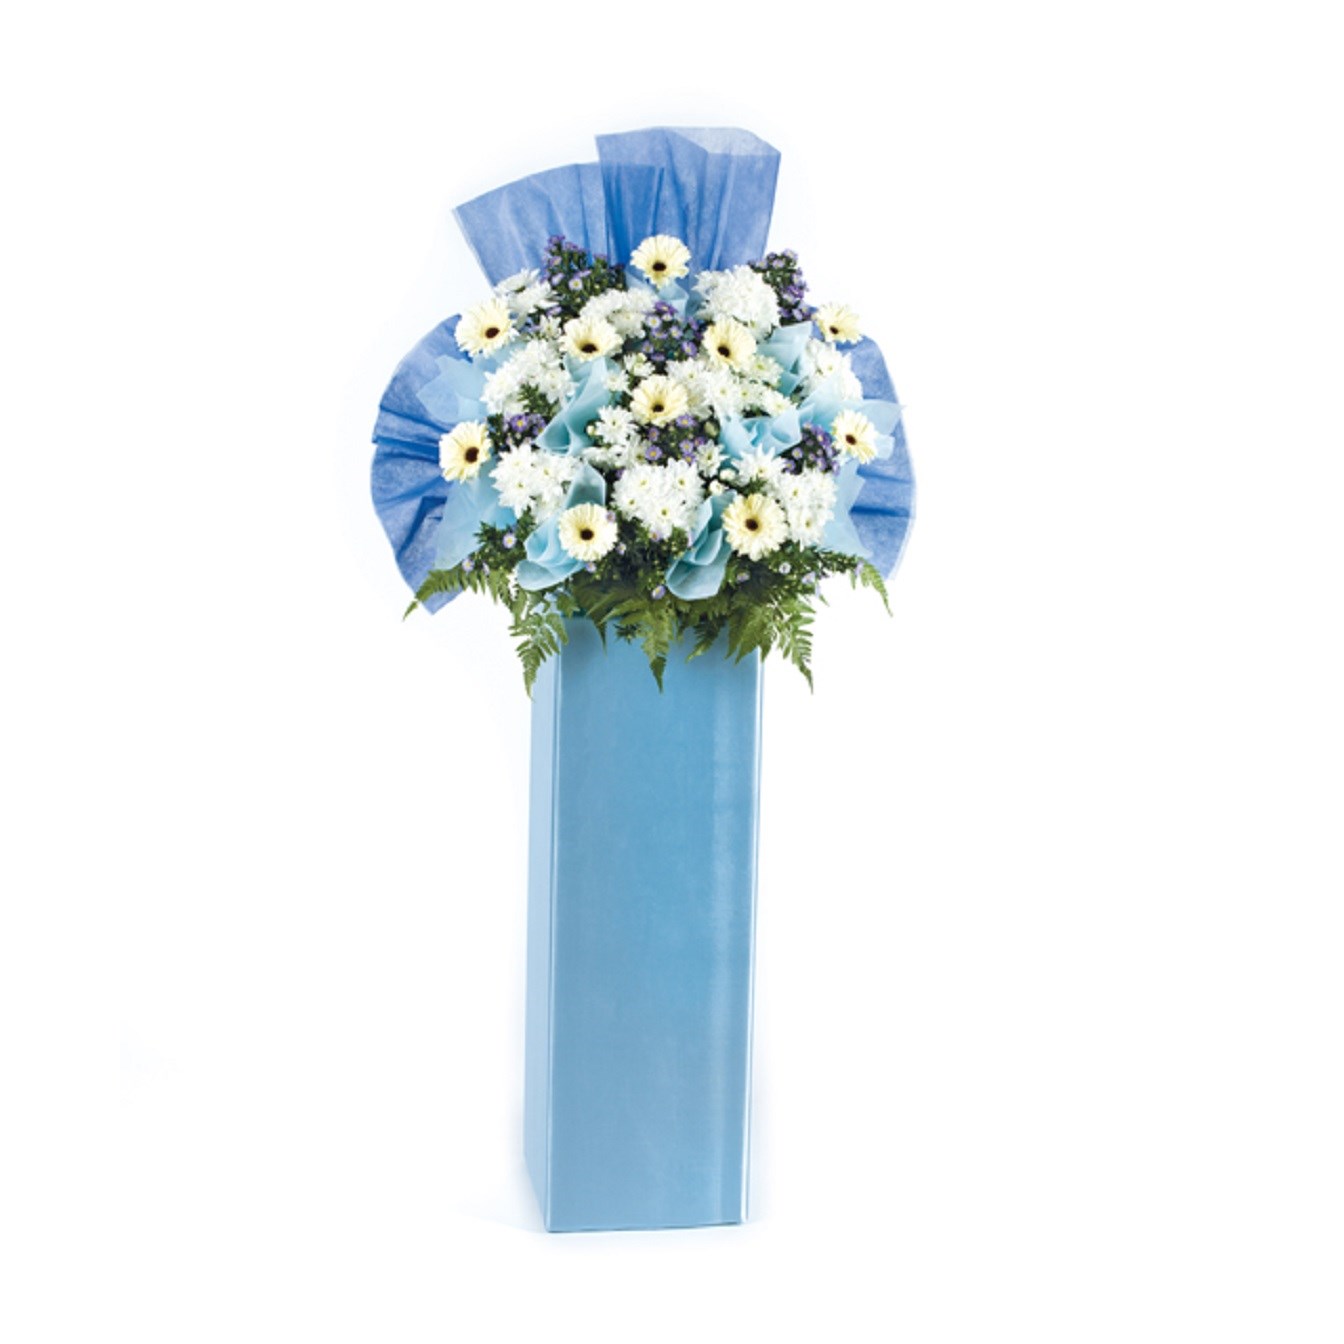 product image for Sympathy Flower Stand - Memories Remain